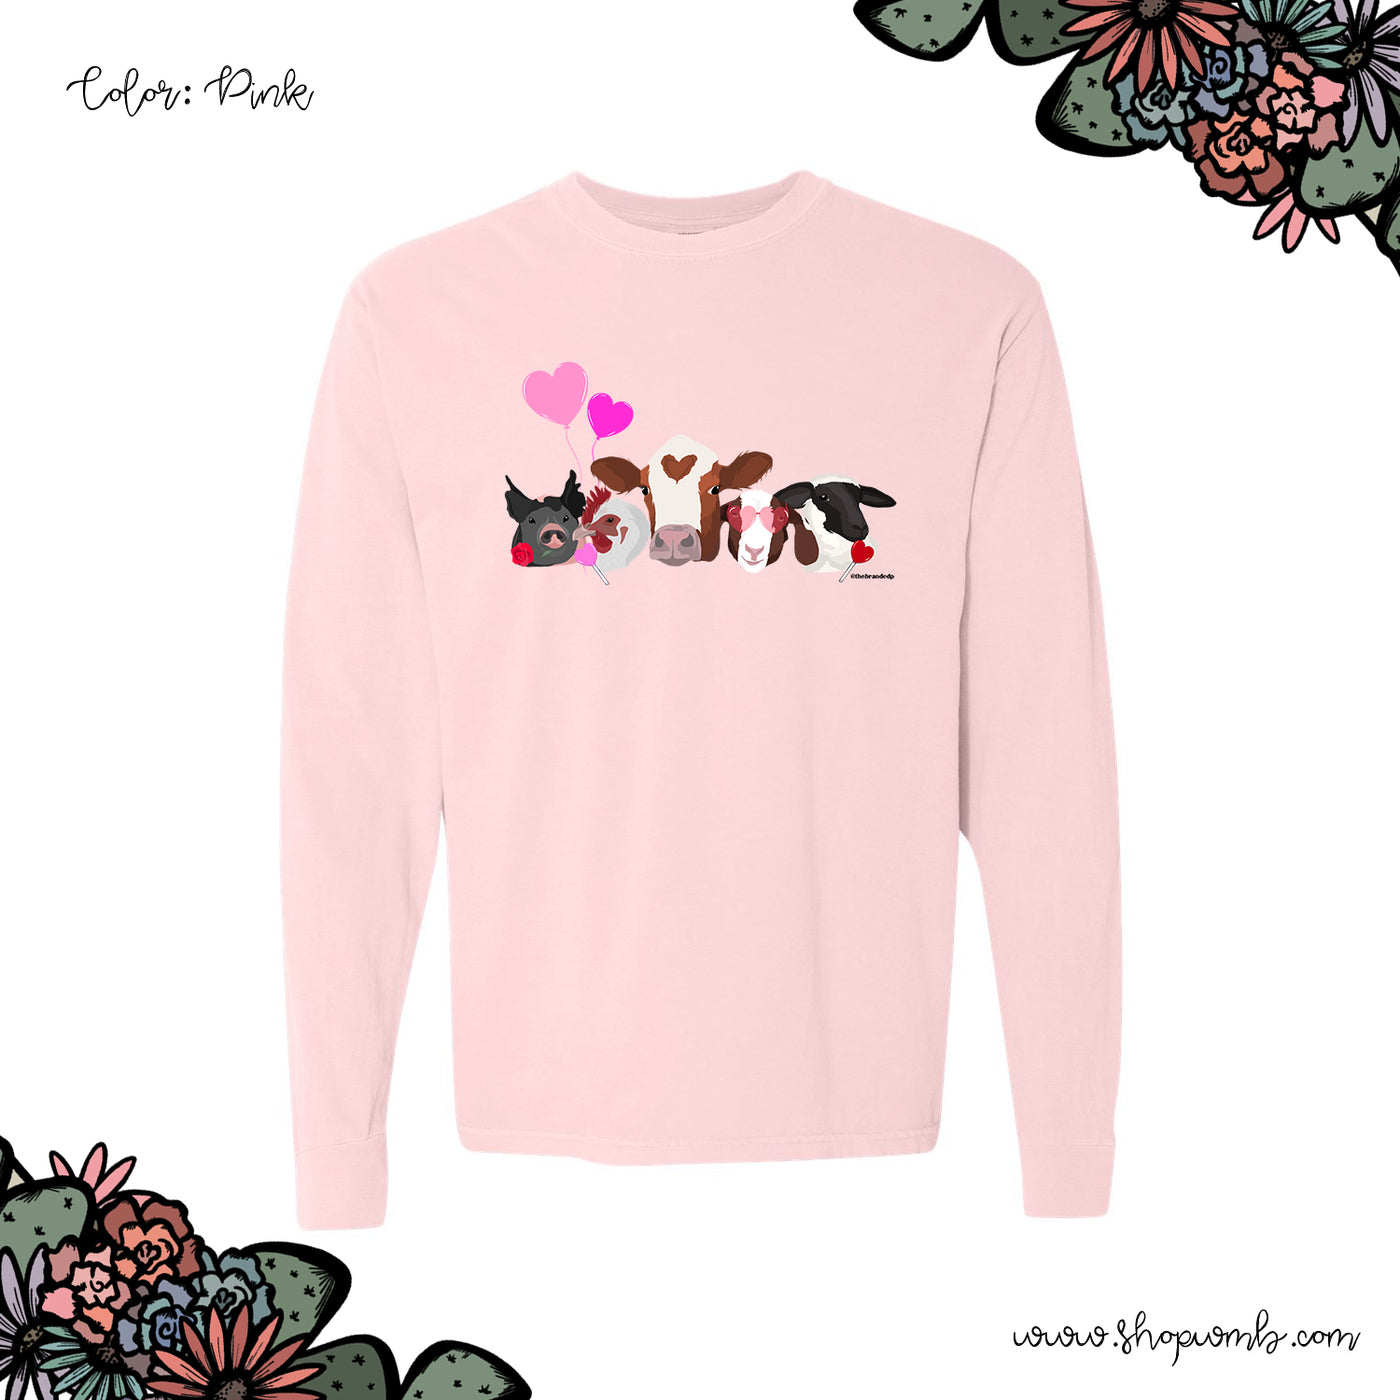 VALENTINES STOCK LONG SLEEVE T-Shirt (S-3XL) - Multiple Colors!